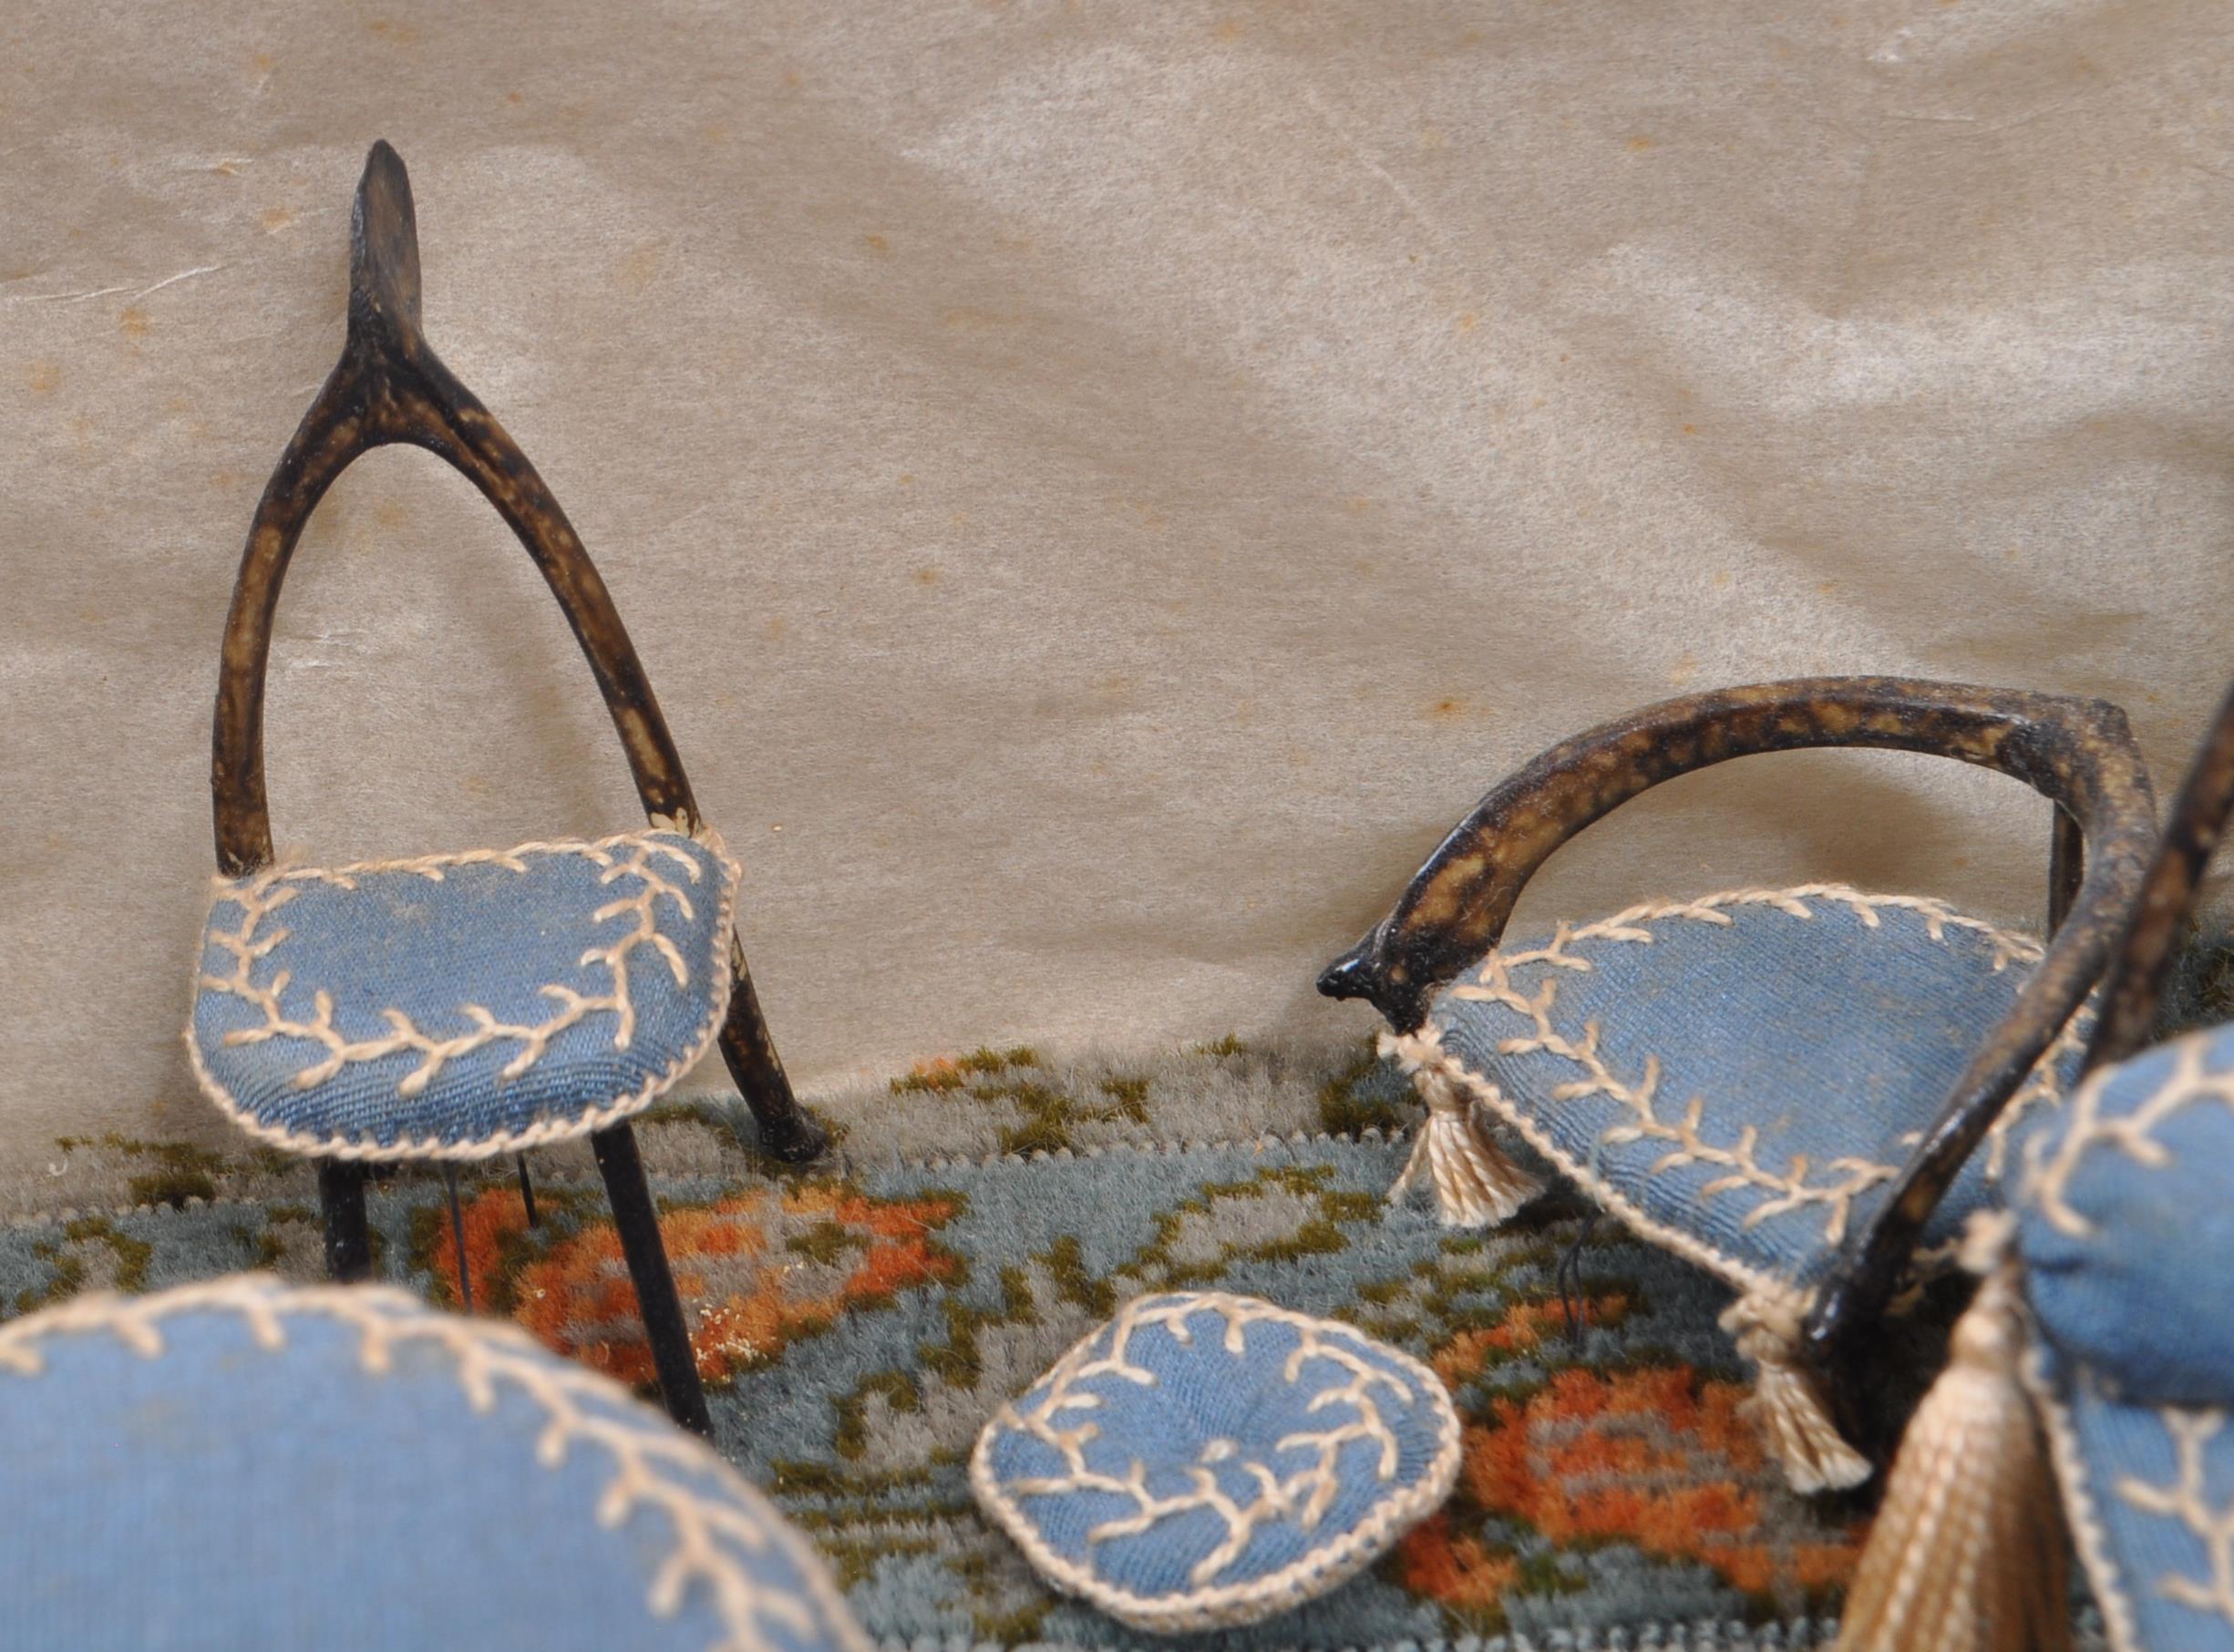 COLLECTION OF LATE 19TH CENTURY WISHBONE MINIATURE FURNITURE - Image 4 of 7